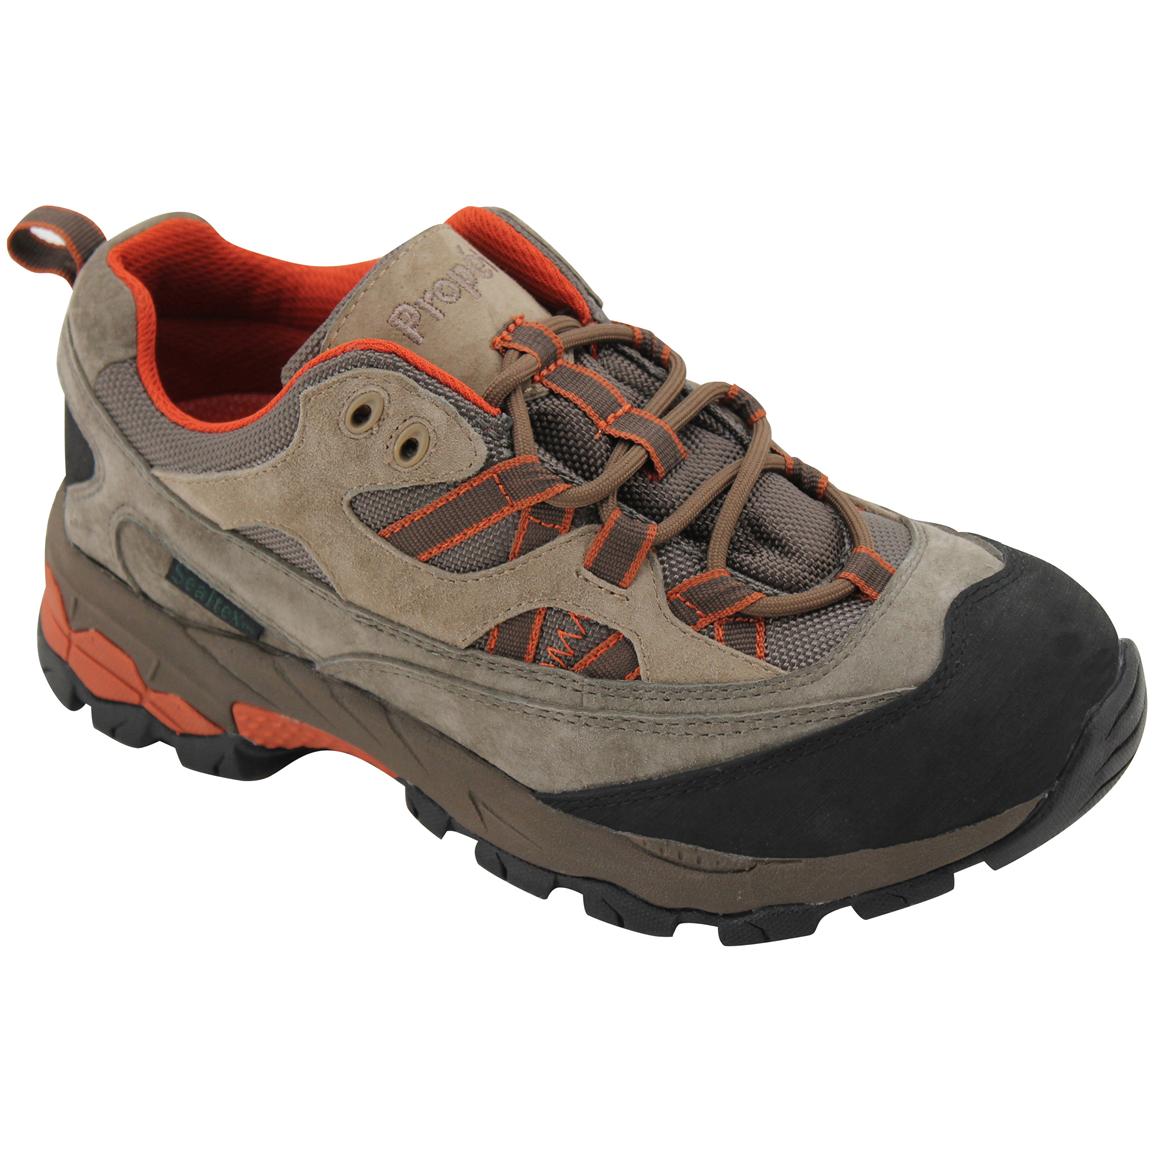 Men's Propet® Eiger Waterproof Trail Shoes - 234497, Hiking Boots ...